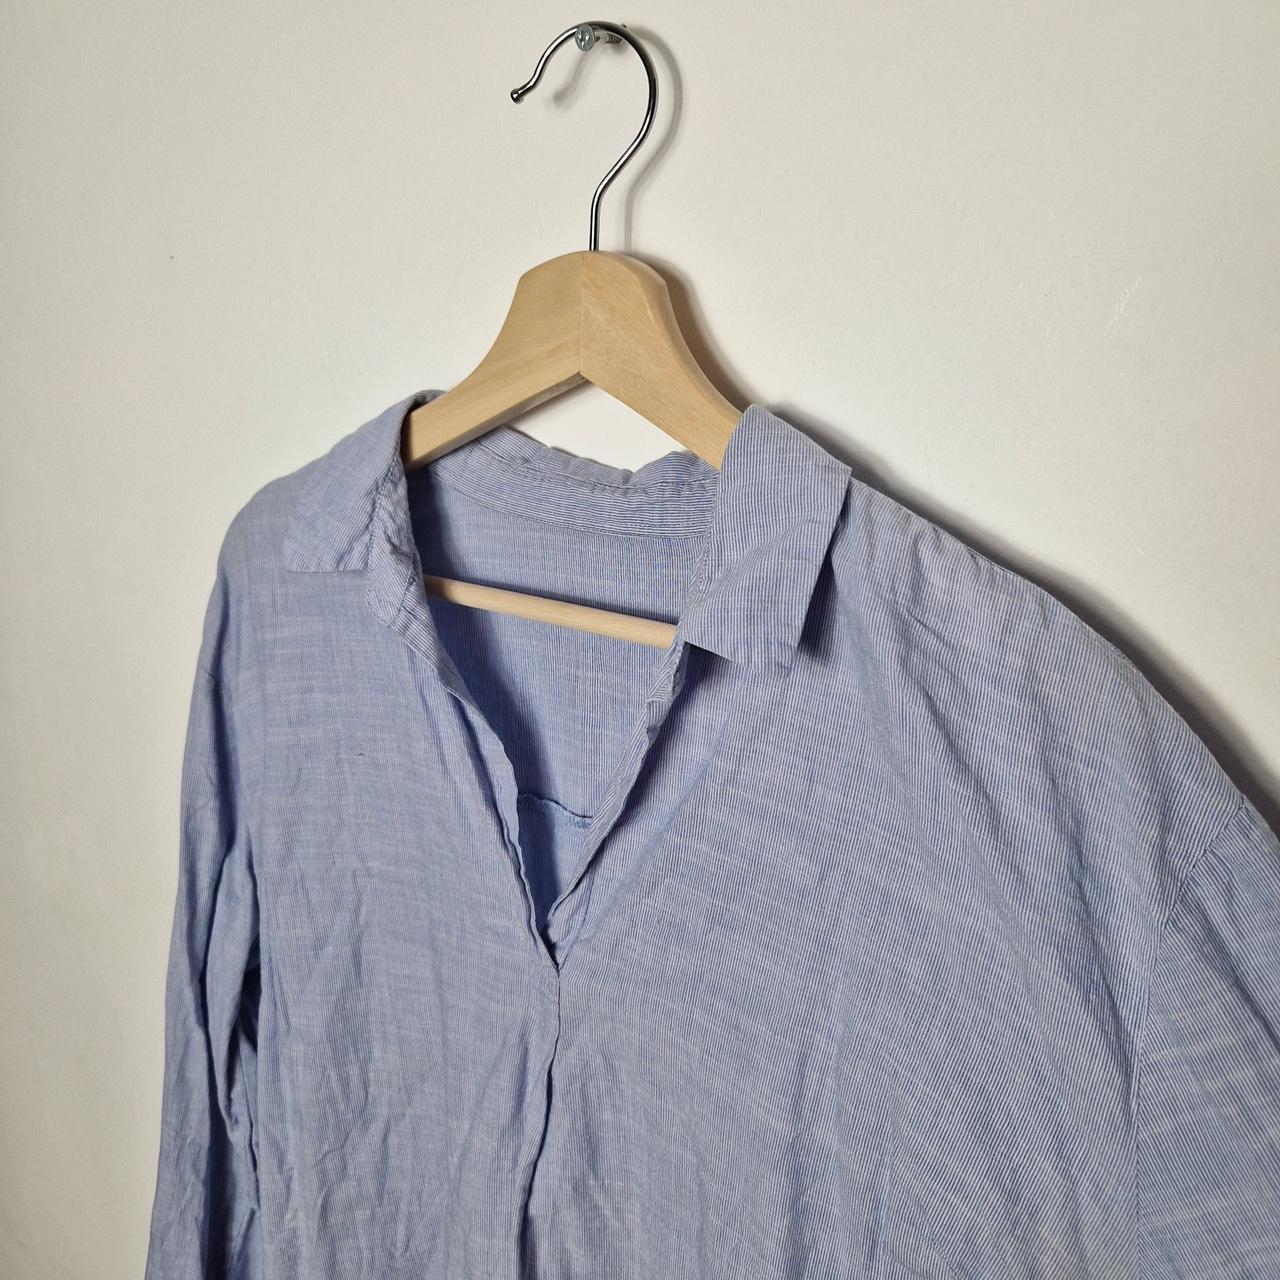 Light blue shirt - super easy to wear tucked into... - Depop